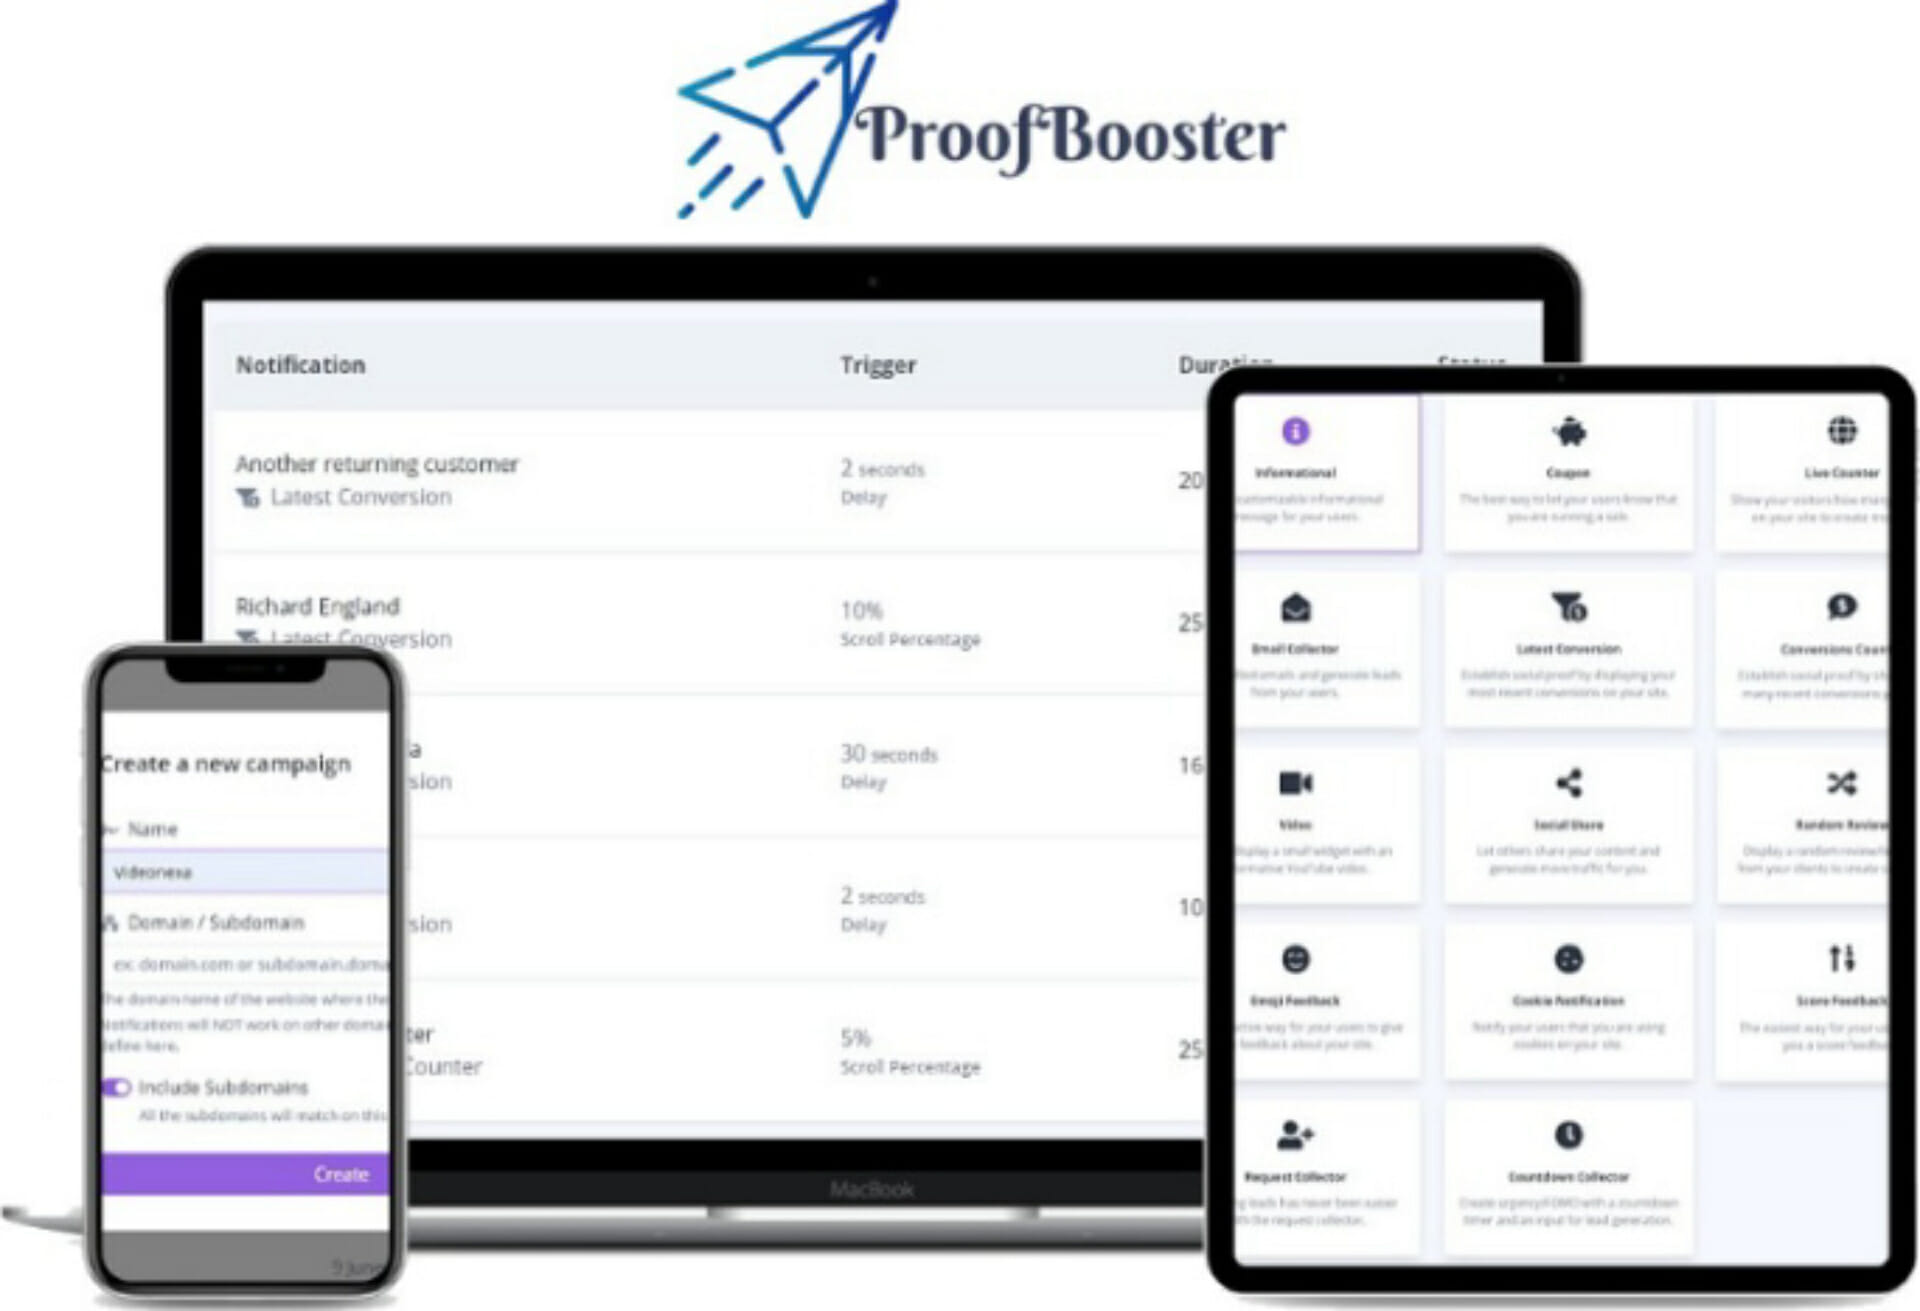 Lifetime Deal to Proofbooster: Plan A for $39